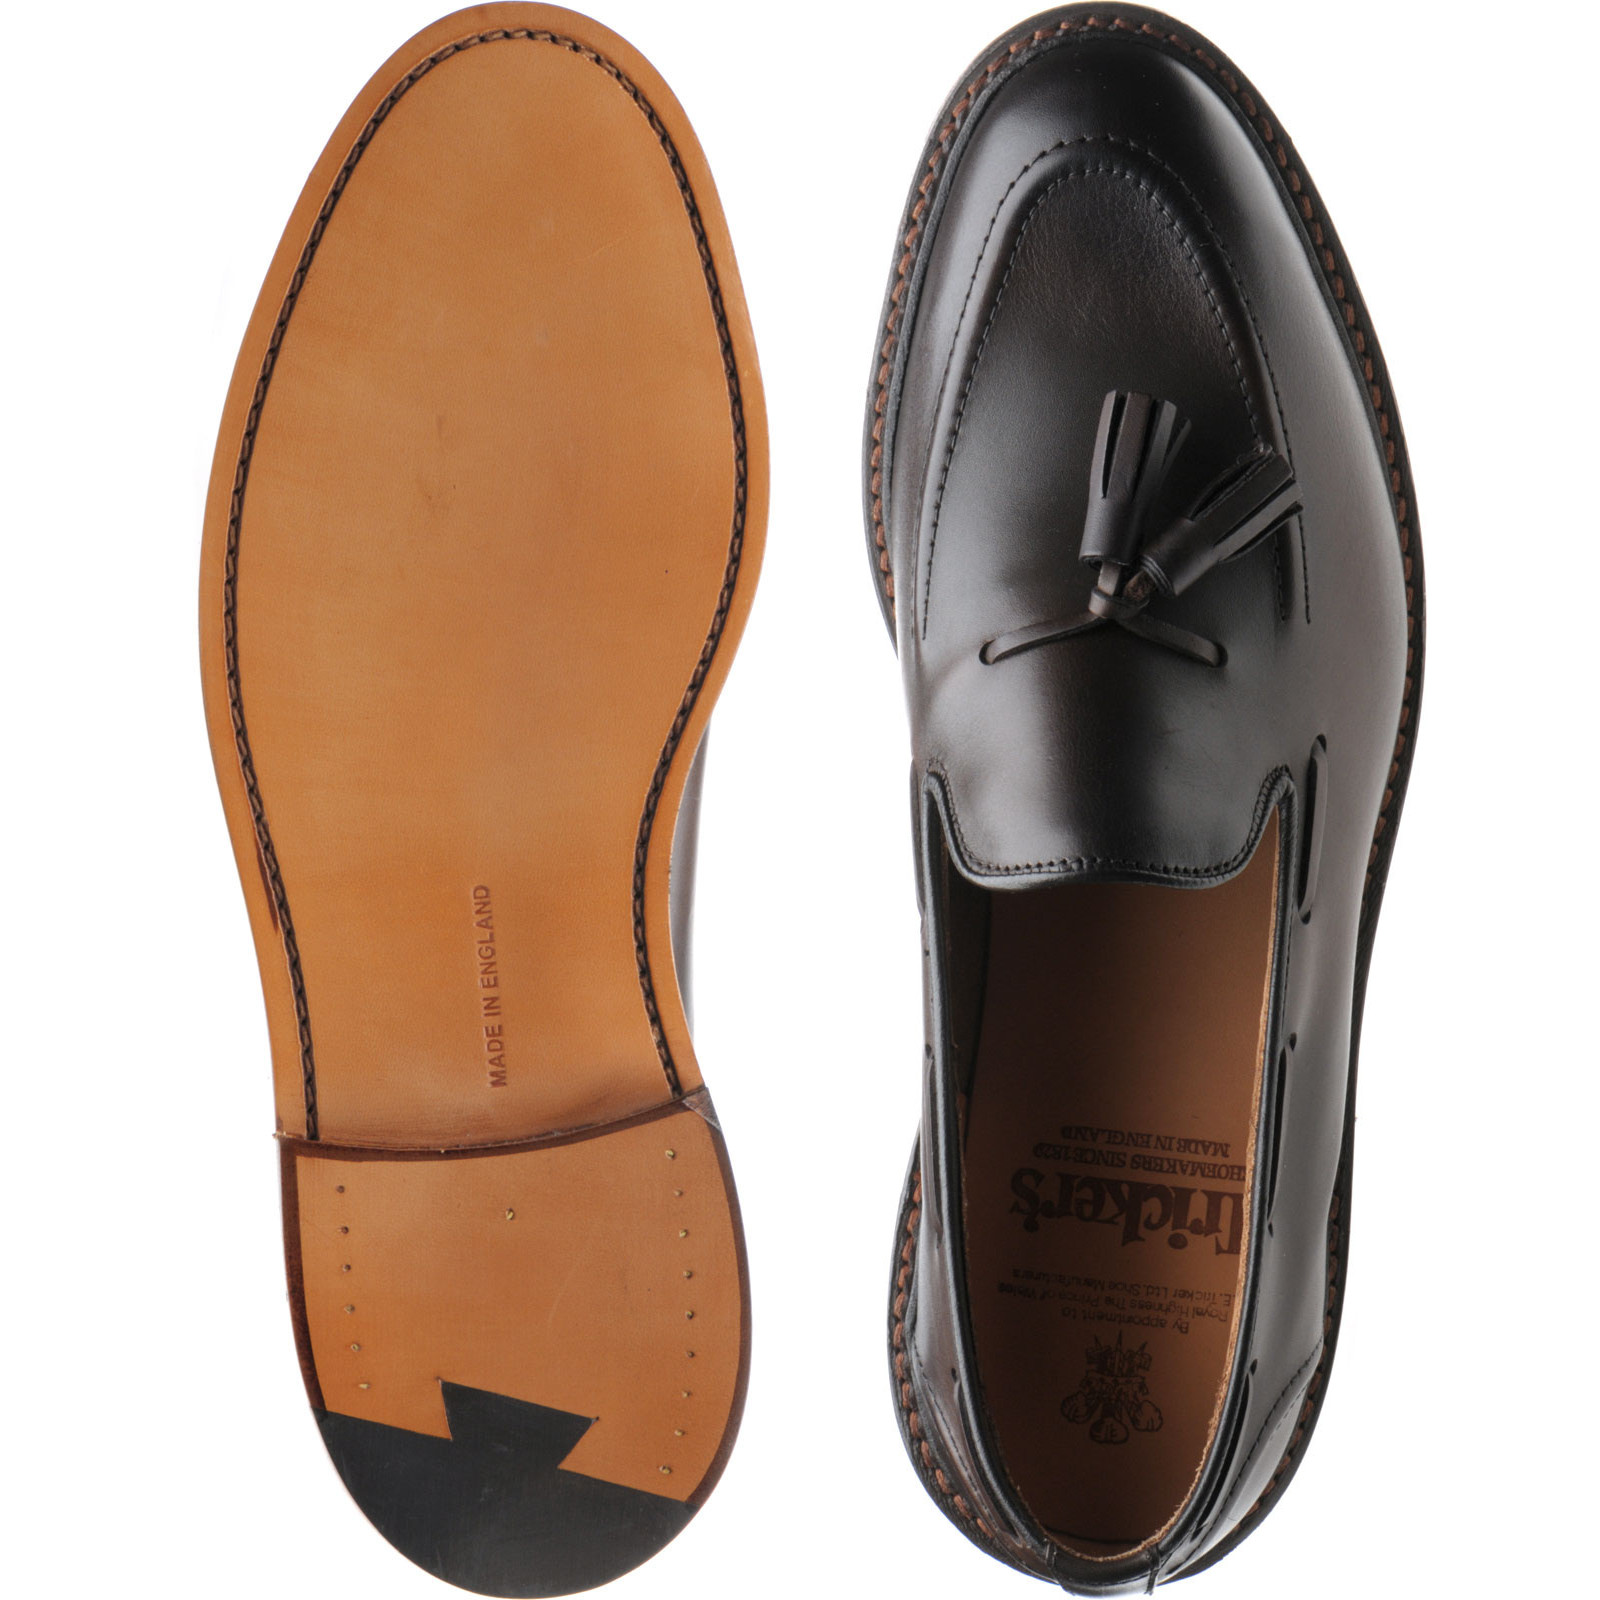 Trickers shoes | Trickers Town | Elton in Espresso Burnished Calf at ...